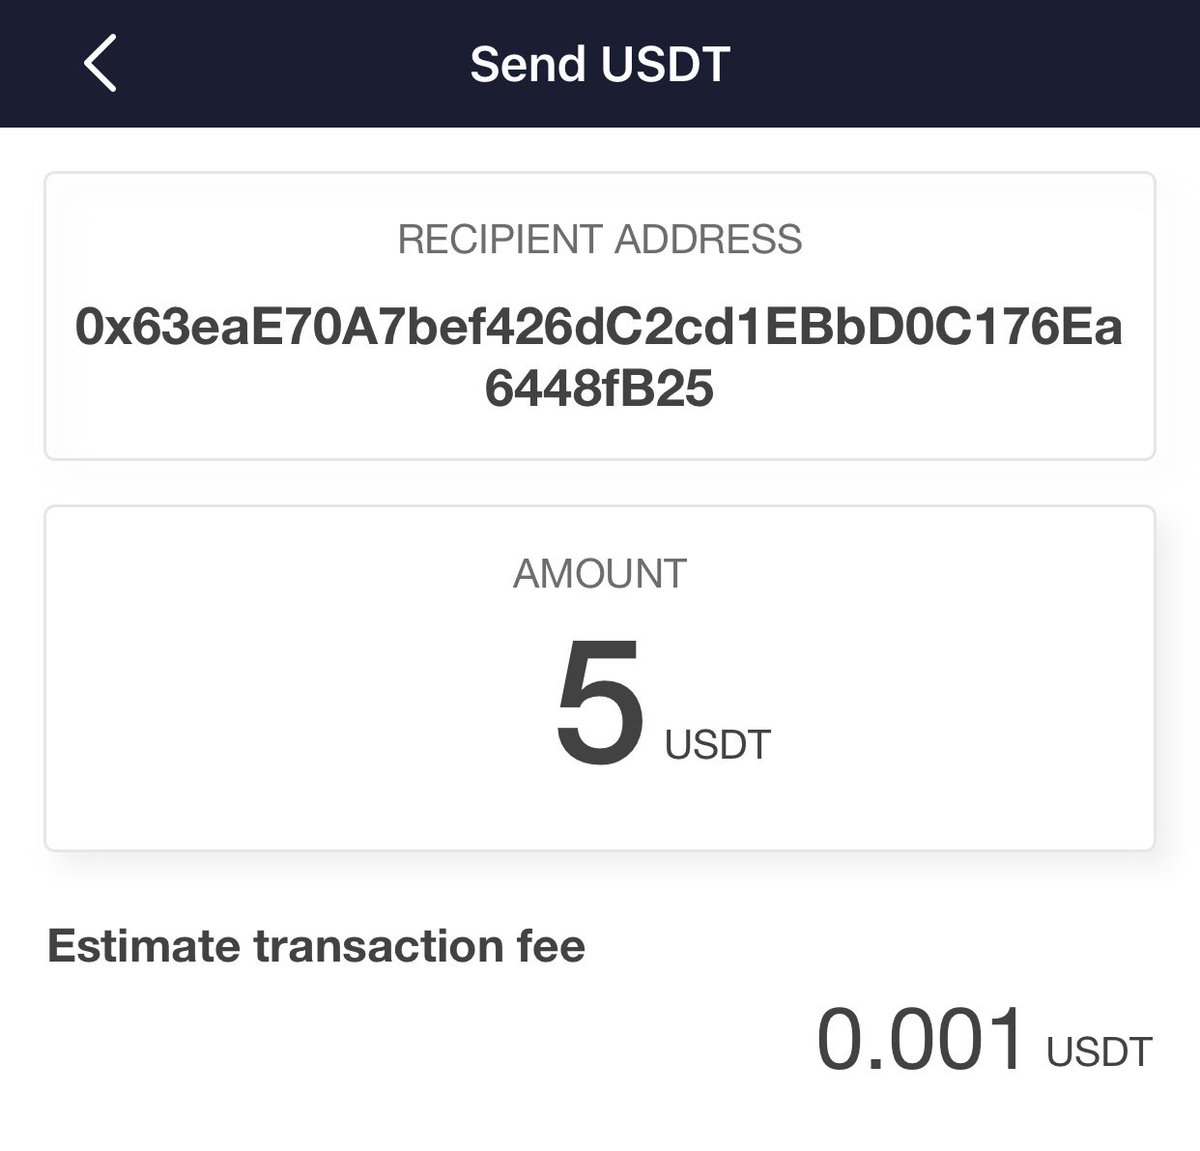 Transfer in USDT and pay tx fee in USDT on-chain and decentralized. Powered by #TomoChain #TomoZ happy to assist issuing your stablecoin. @Tether_to @paoloardoino @PaxosGlobal